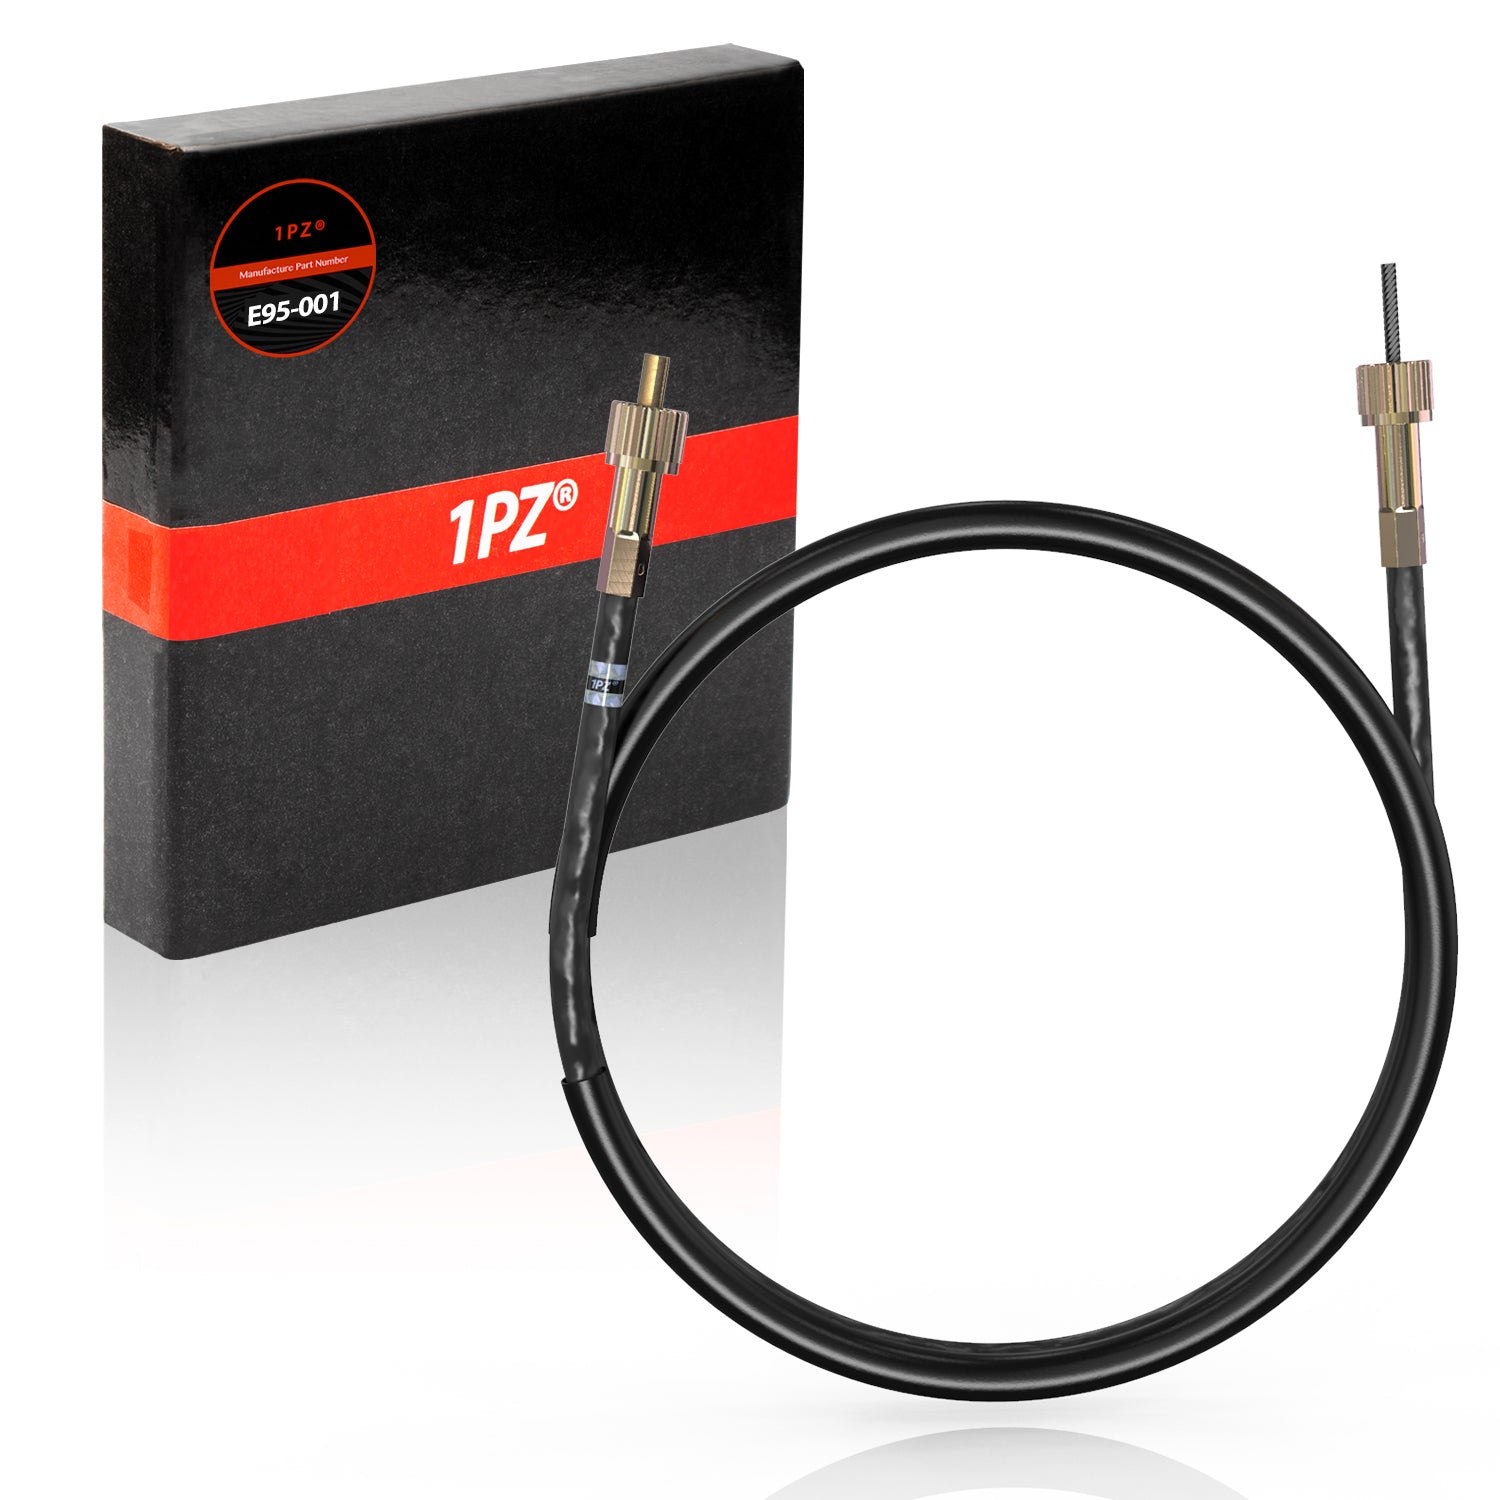 1PZ Speedometer Cable 37 inch Length for Kawasaki Motorcycles